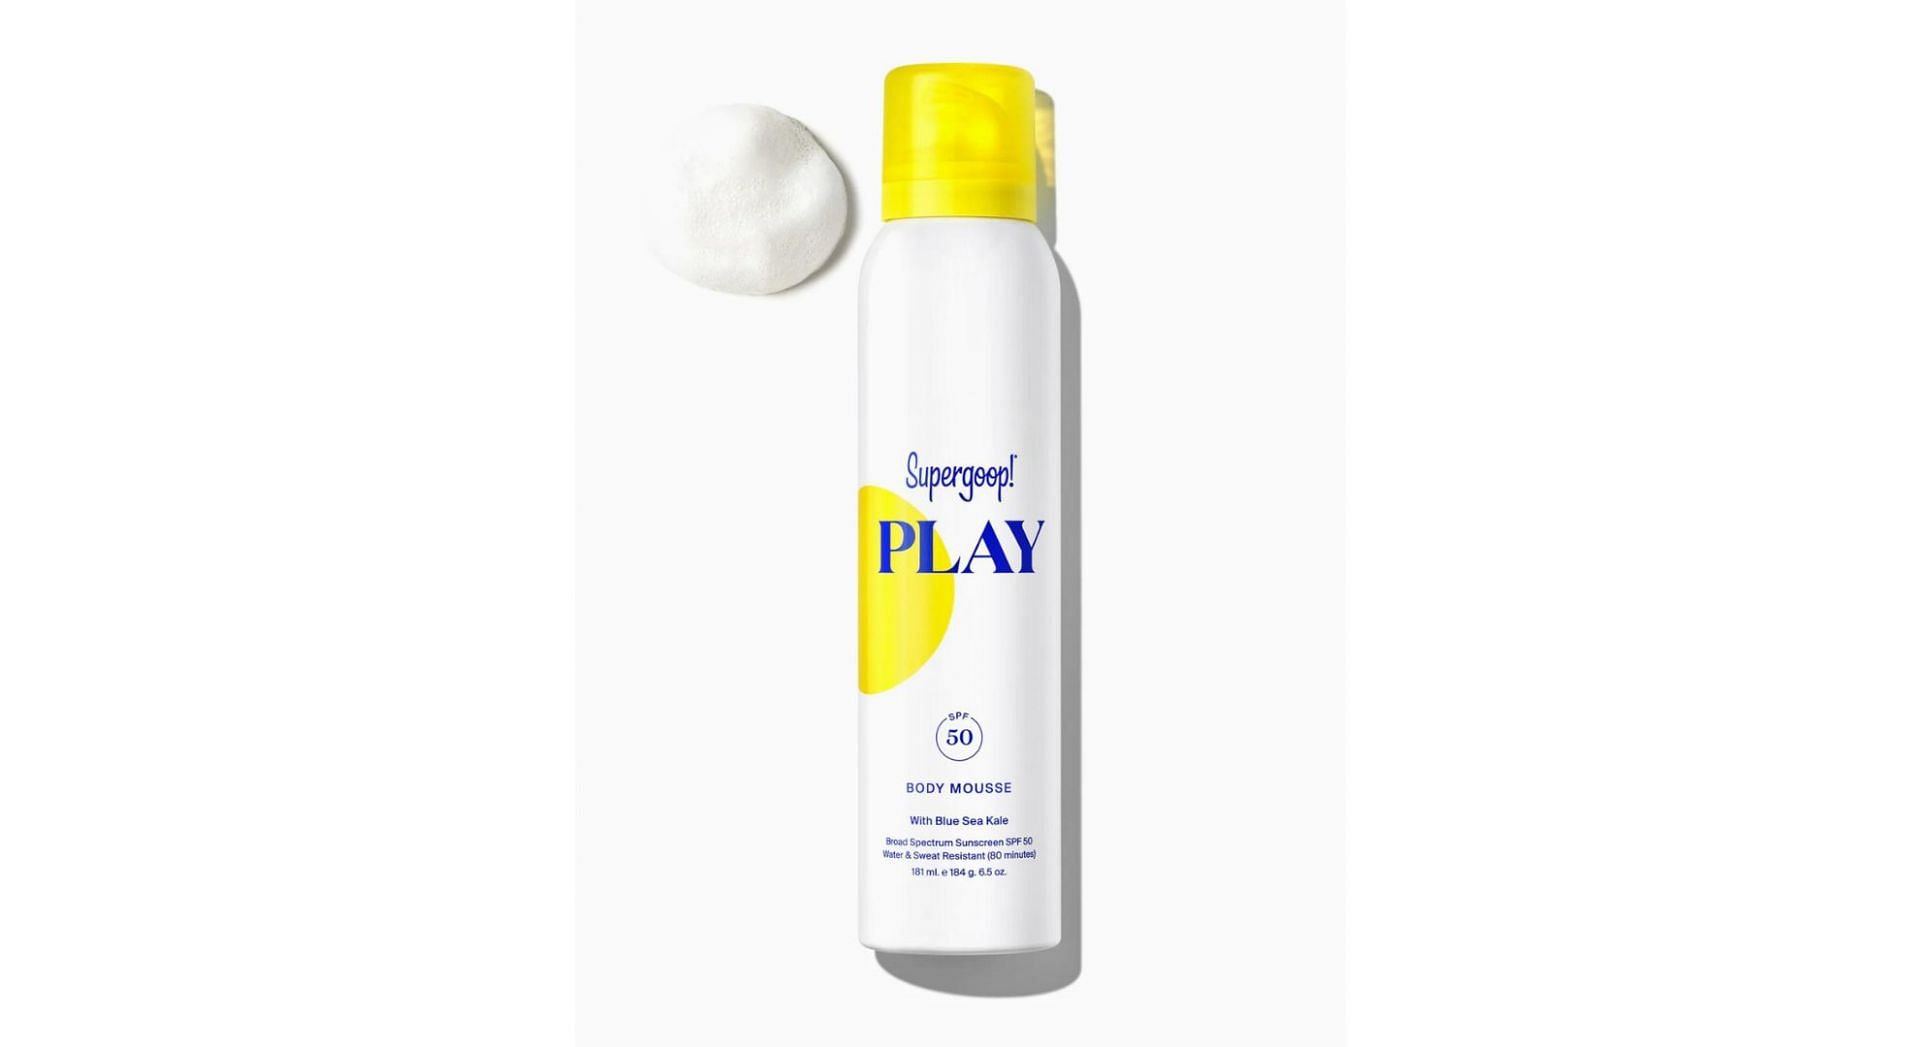 PLAY Body Mousse SPF 50 (Image via Supergoop)